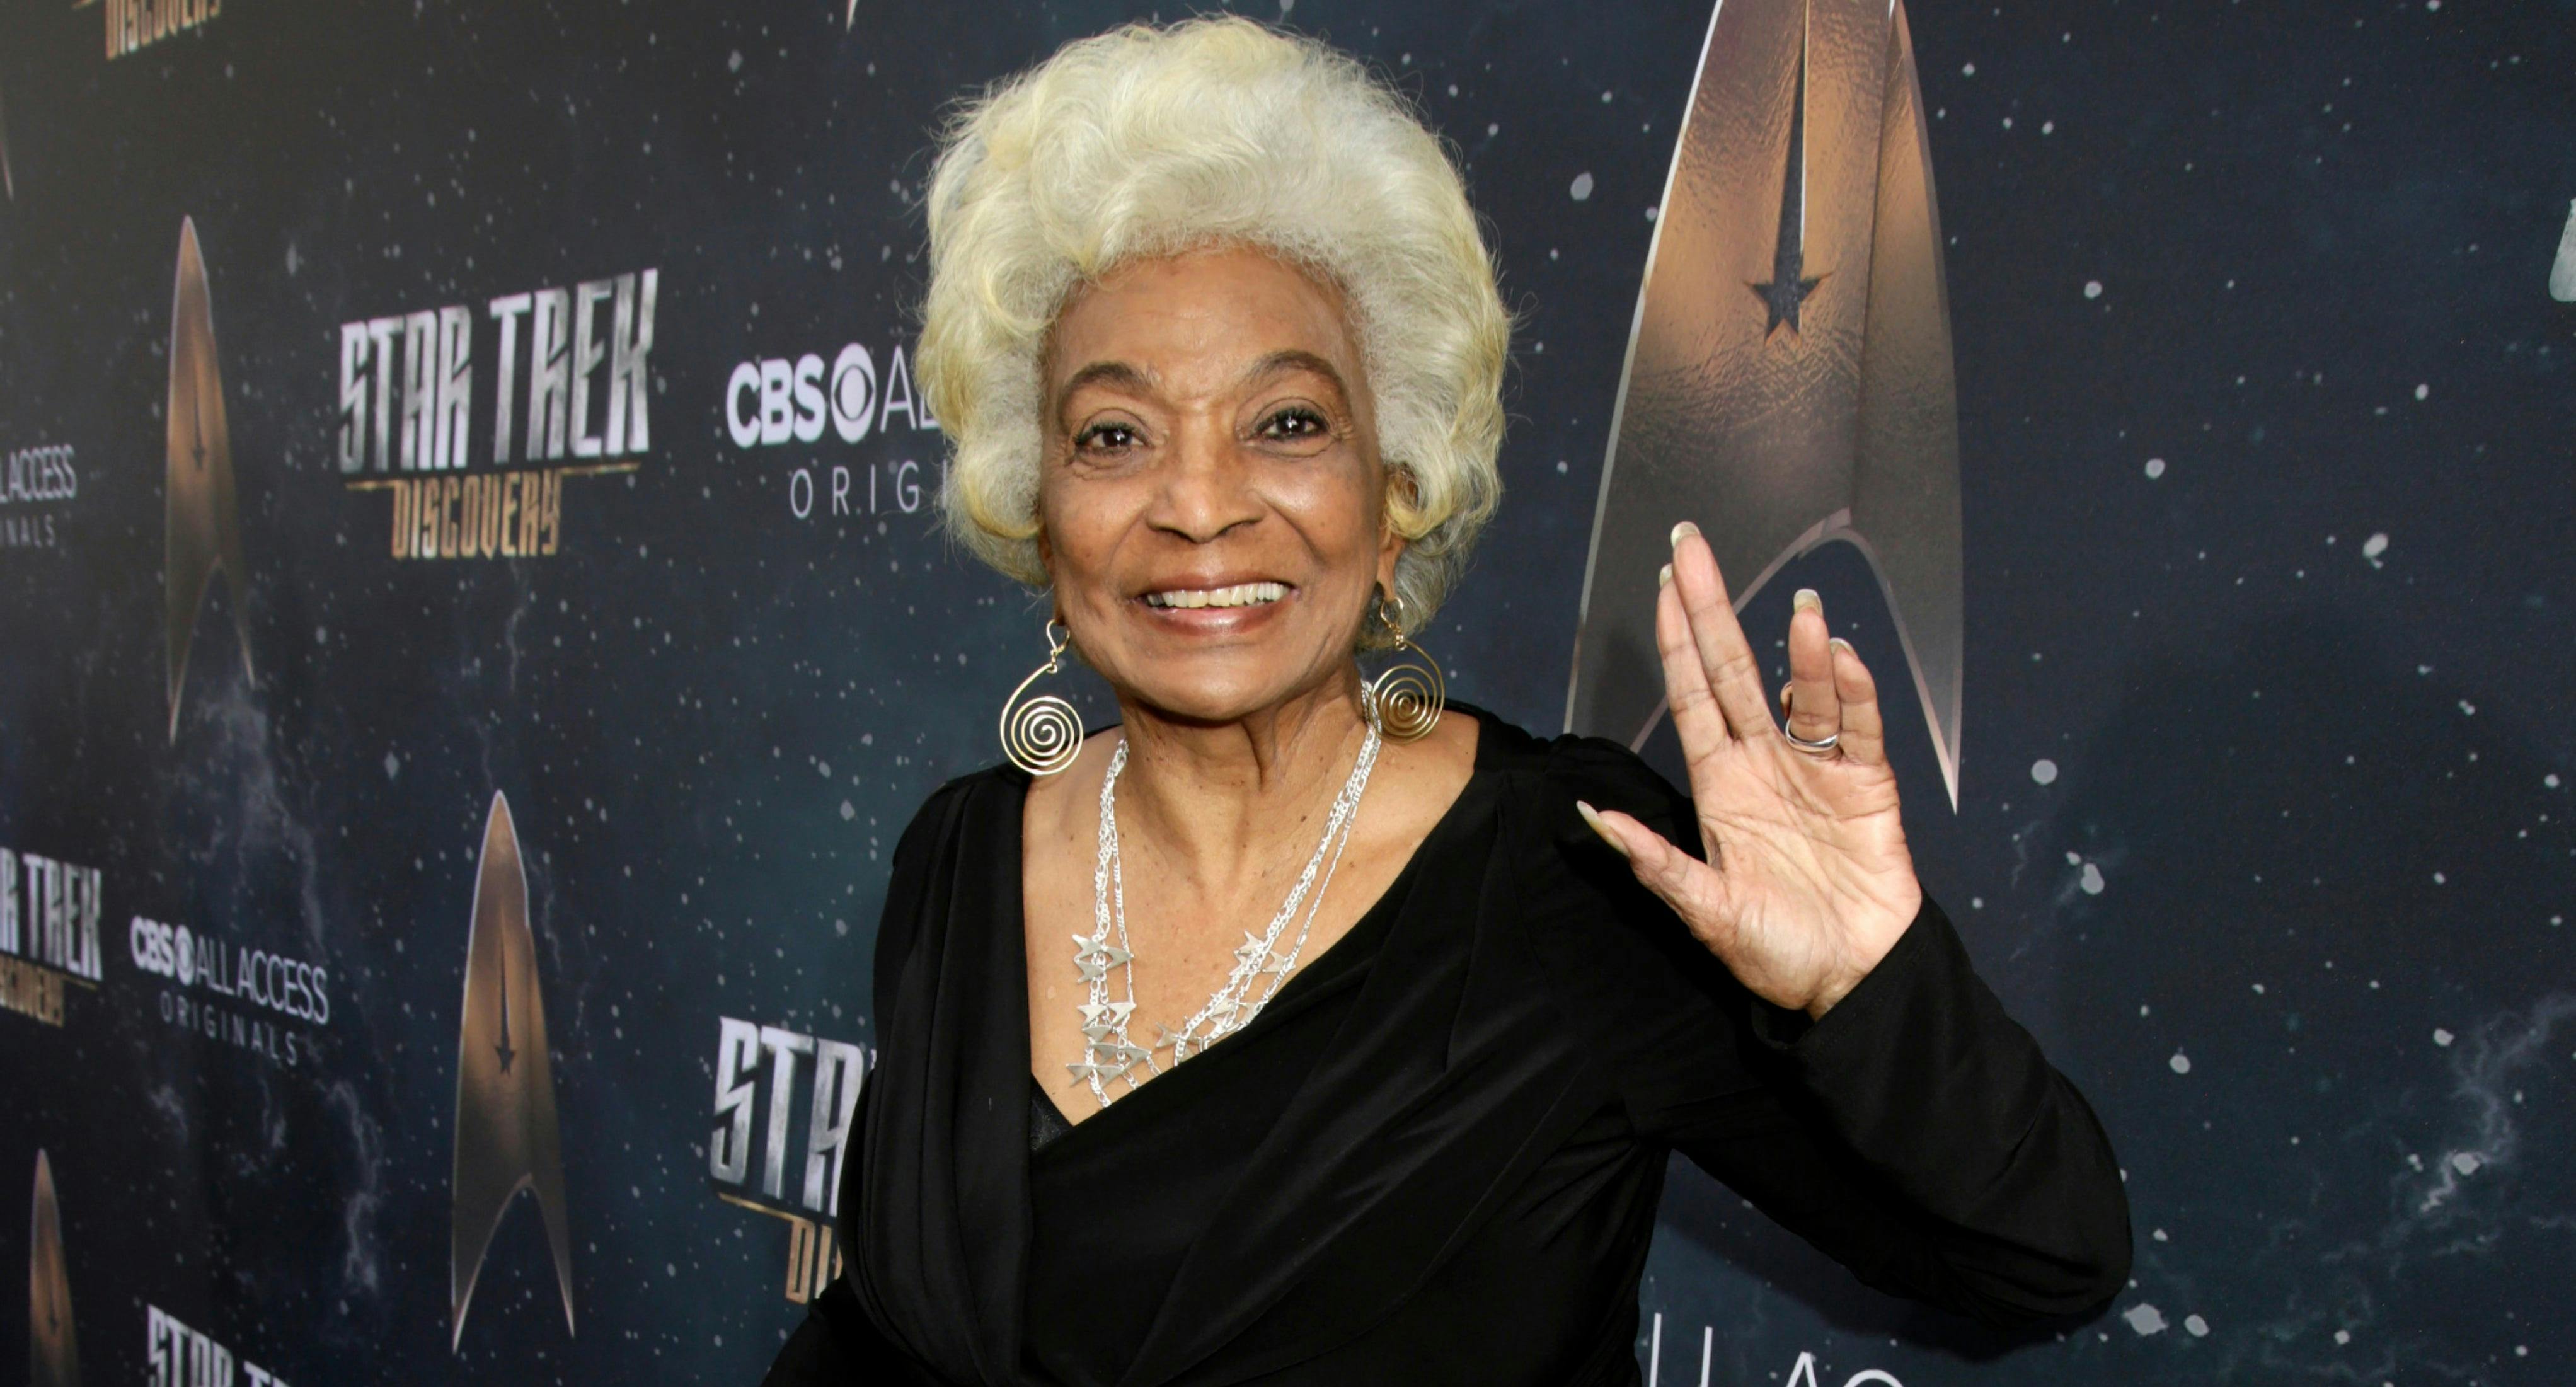 Nichelle Nichols at the Star Trek: Discovery Premiere Red Carpet Event